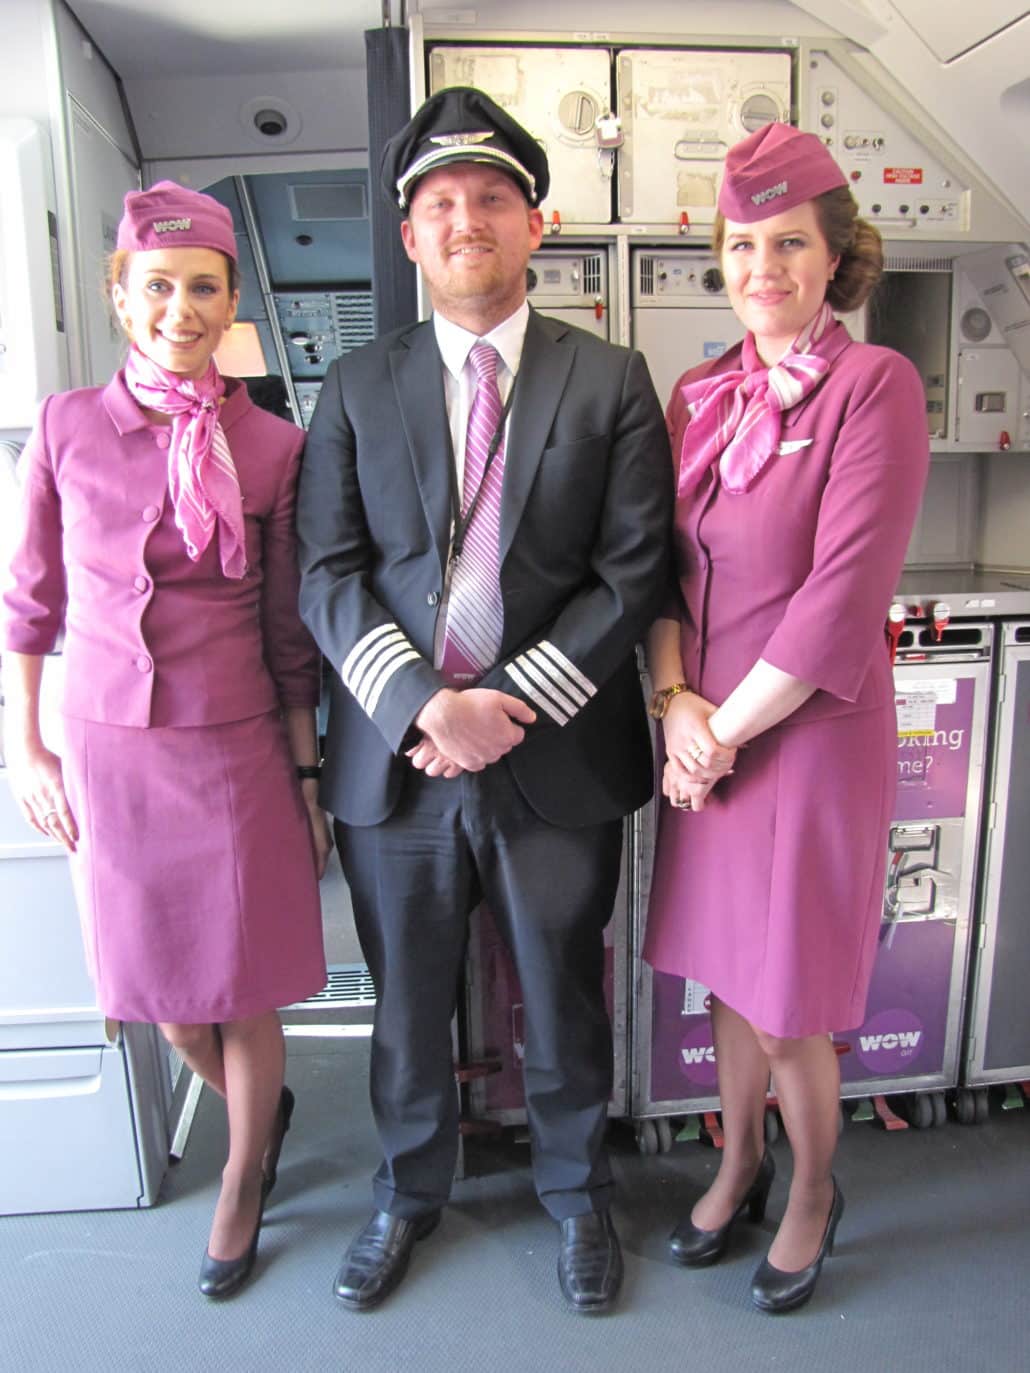 The flight crew poses for a snap upon landing in Bristol, England, on WOW’s inaugural flight there